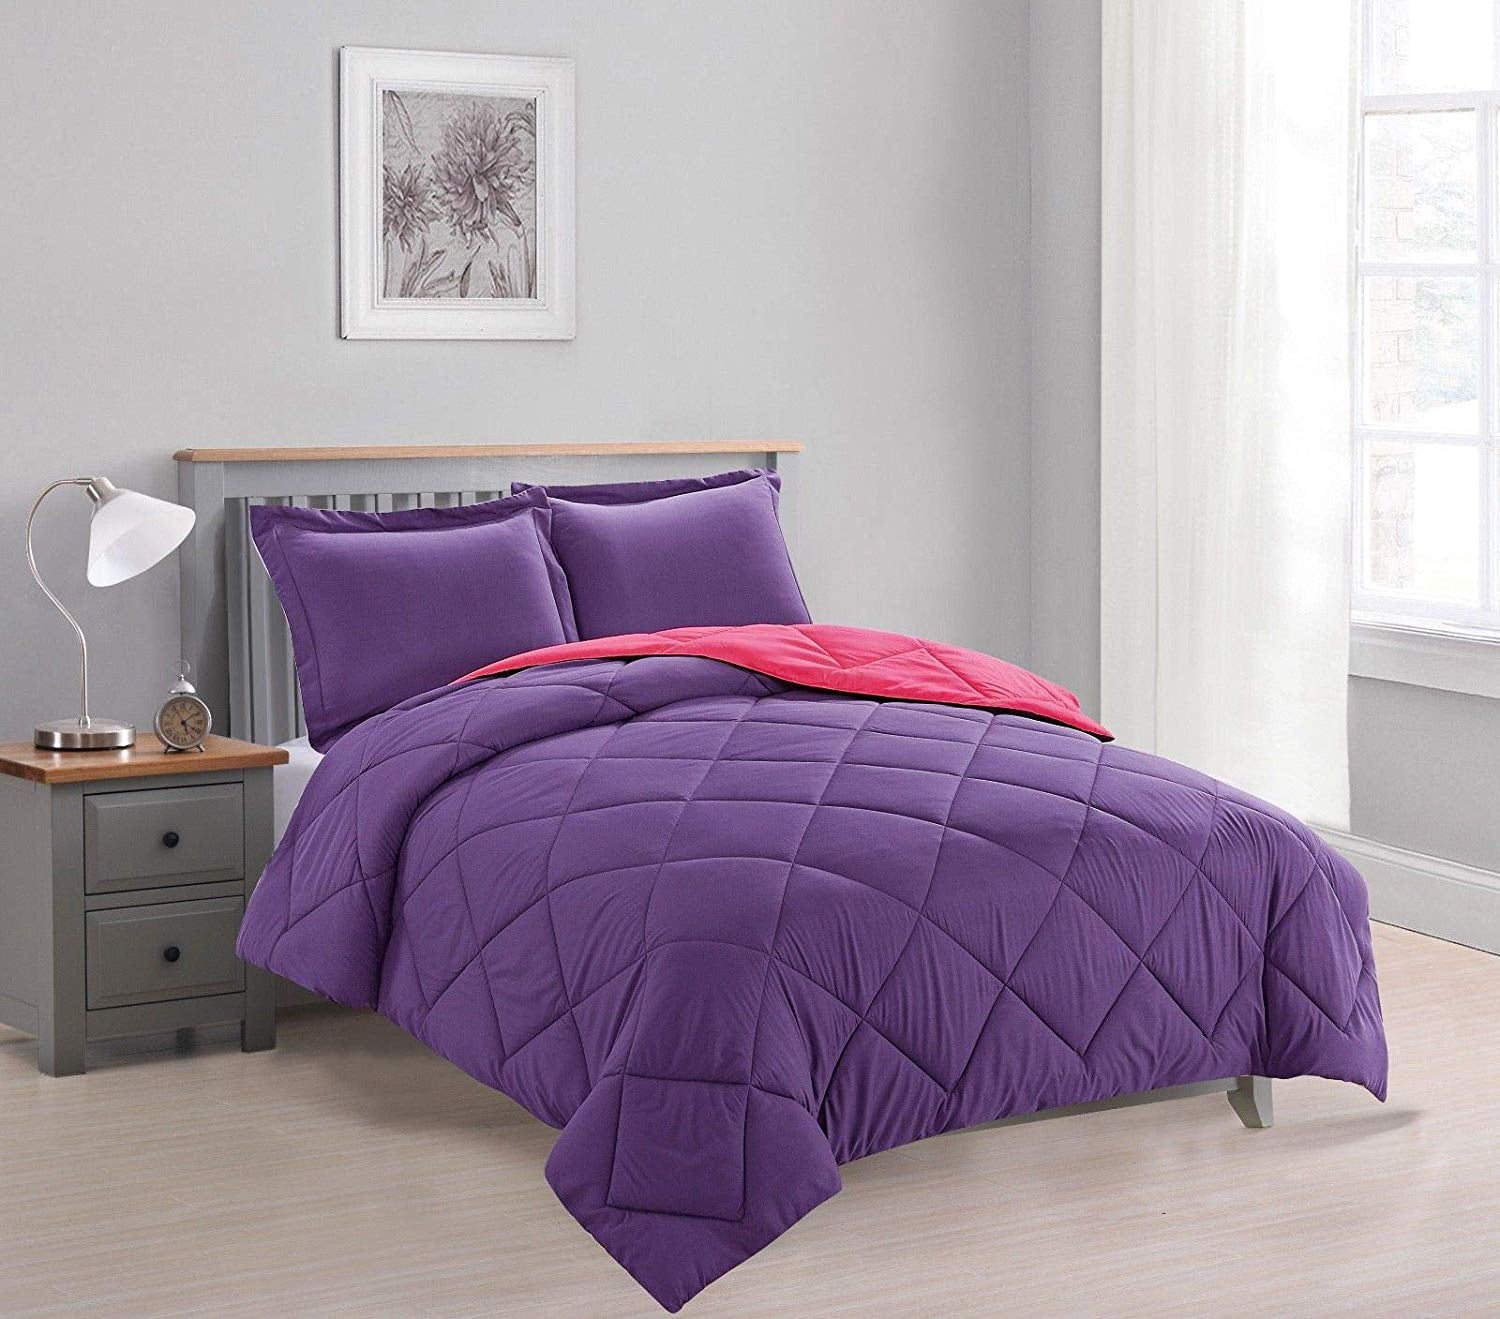 comforter Purple/Hot pink With Sheet Empire Home Essentials Down Reversible 7PC 